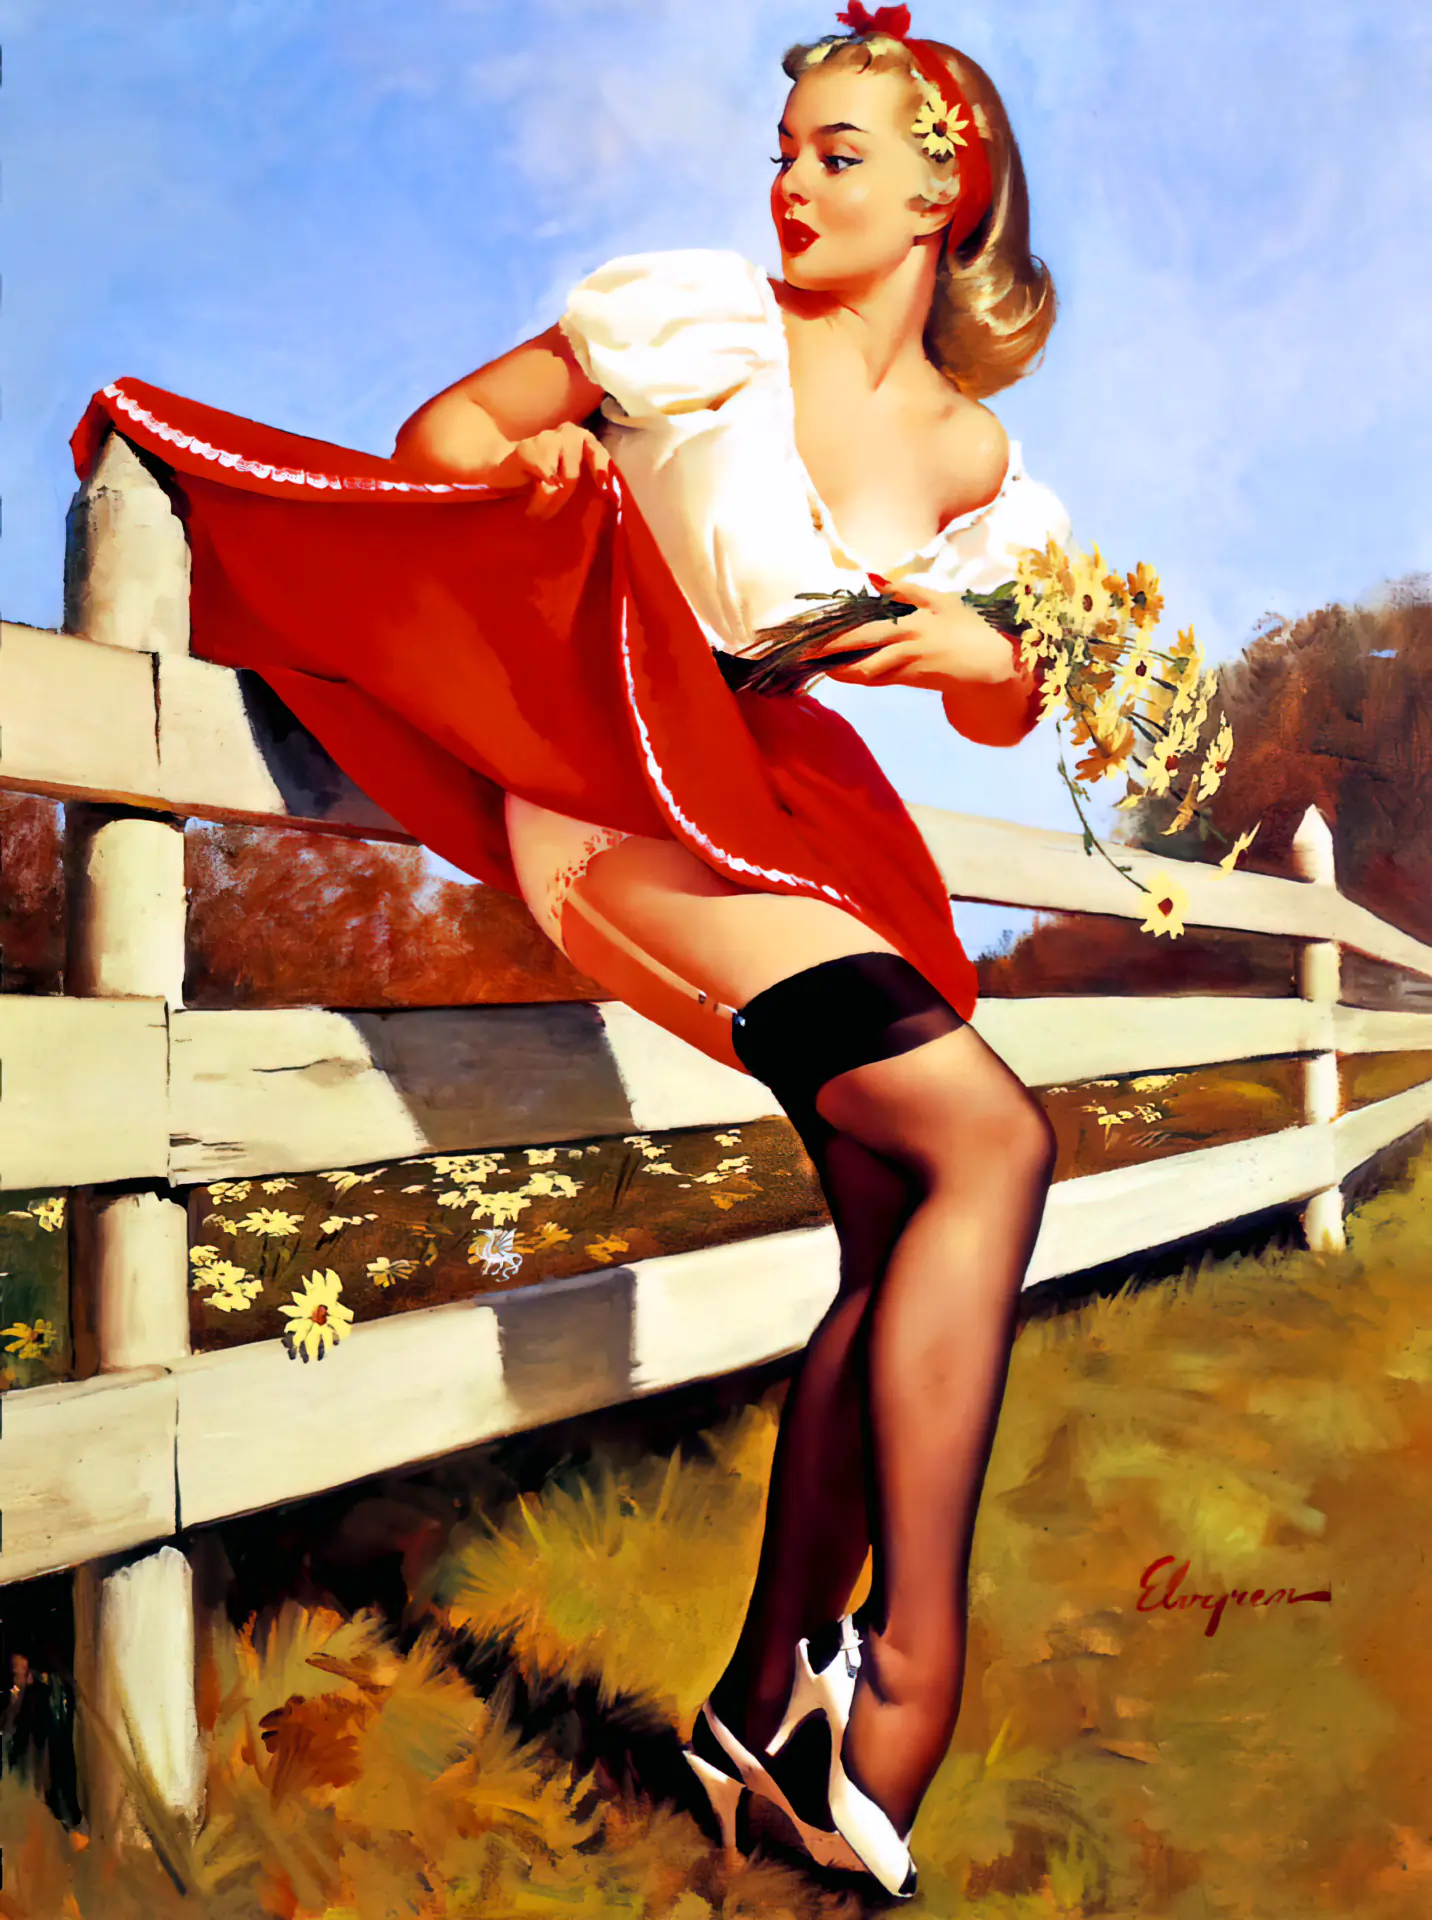 Vintage art porn photo Sweet classic blonde pin-up has her skirt stuck on a fence